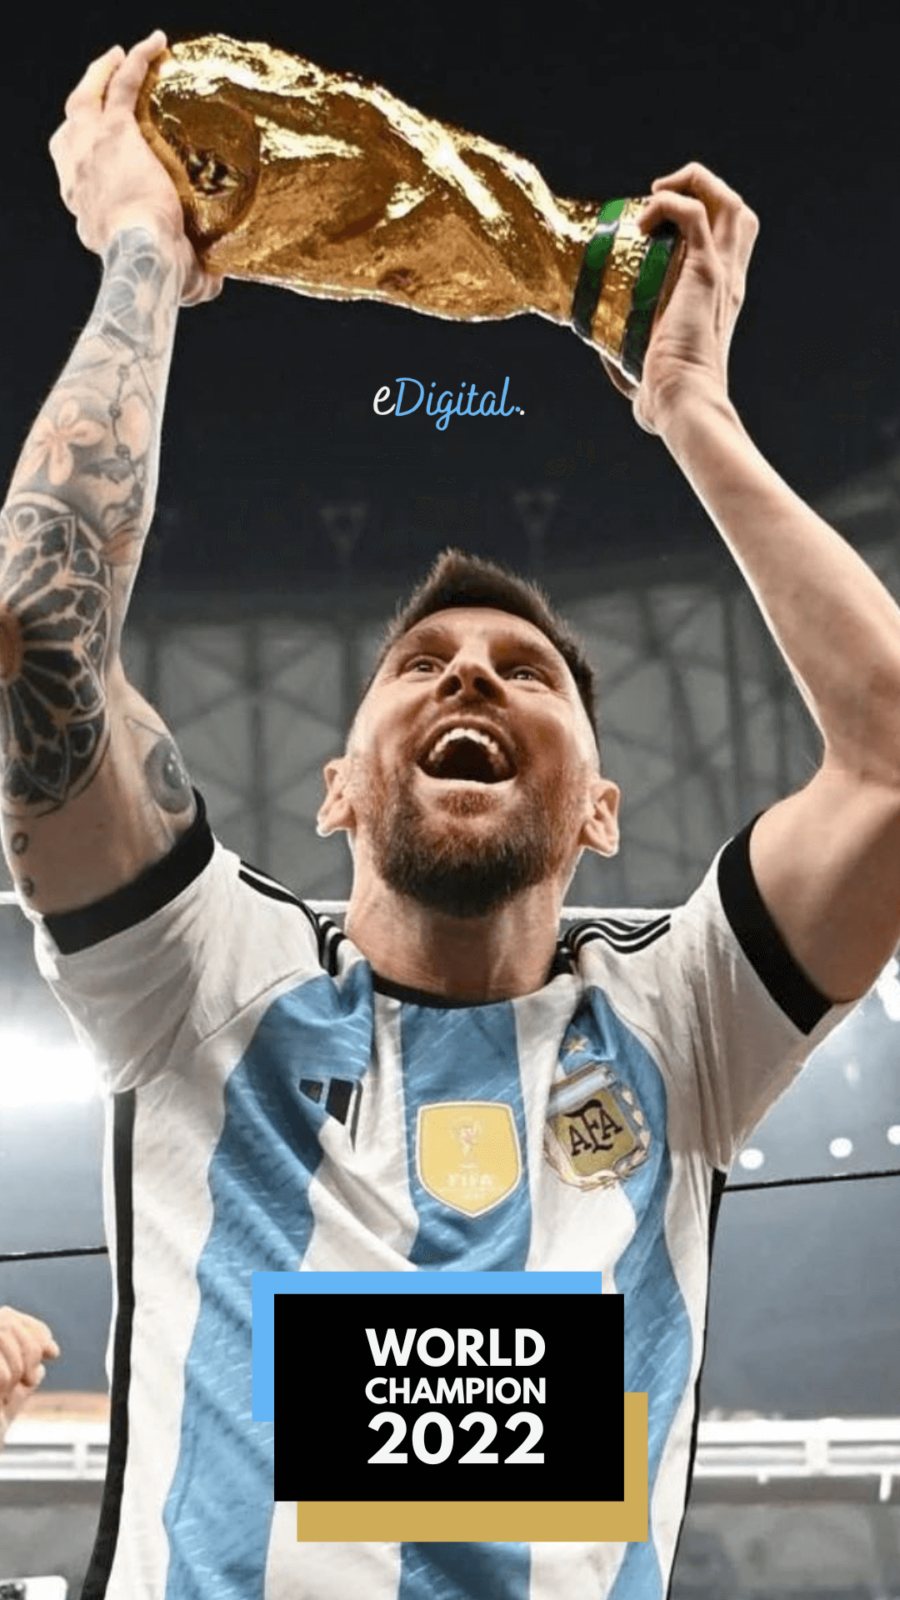 THE BEST 10 LIONEL MESSI WALLPAPER HD ARGENTINA PHOTOS IN 2022